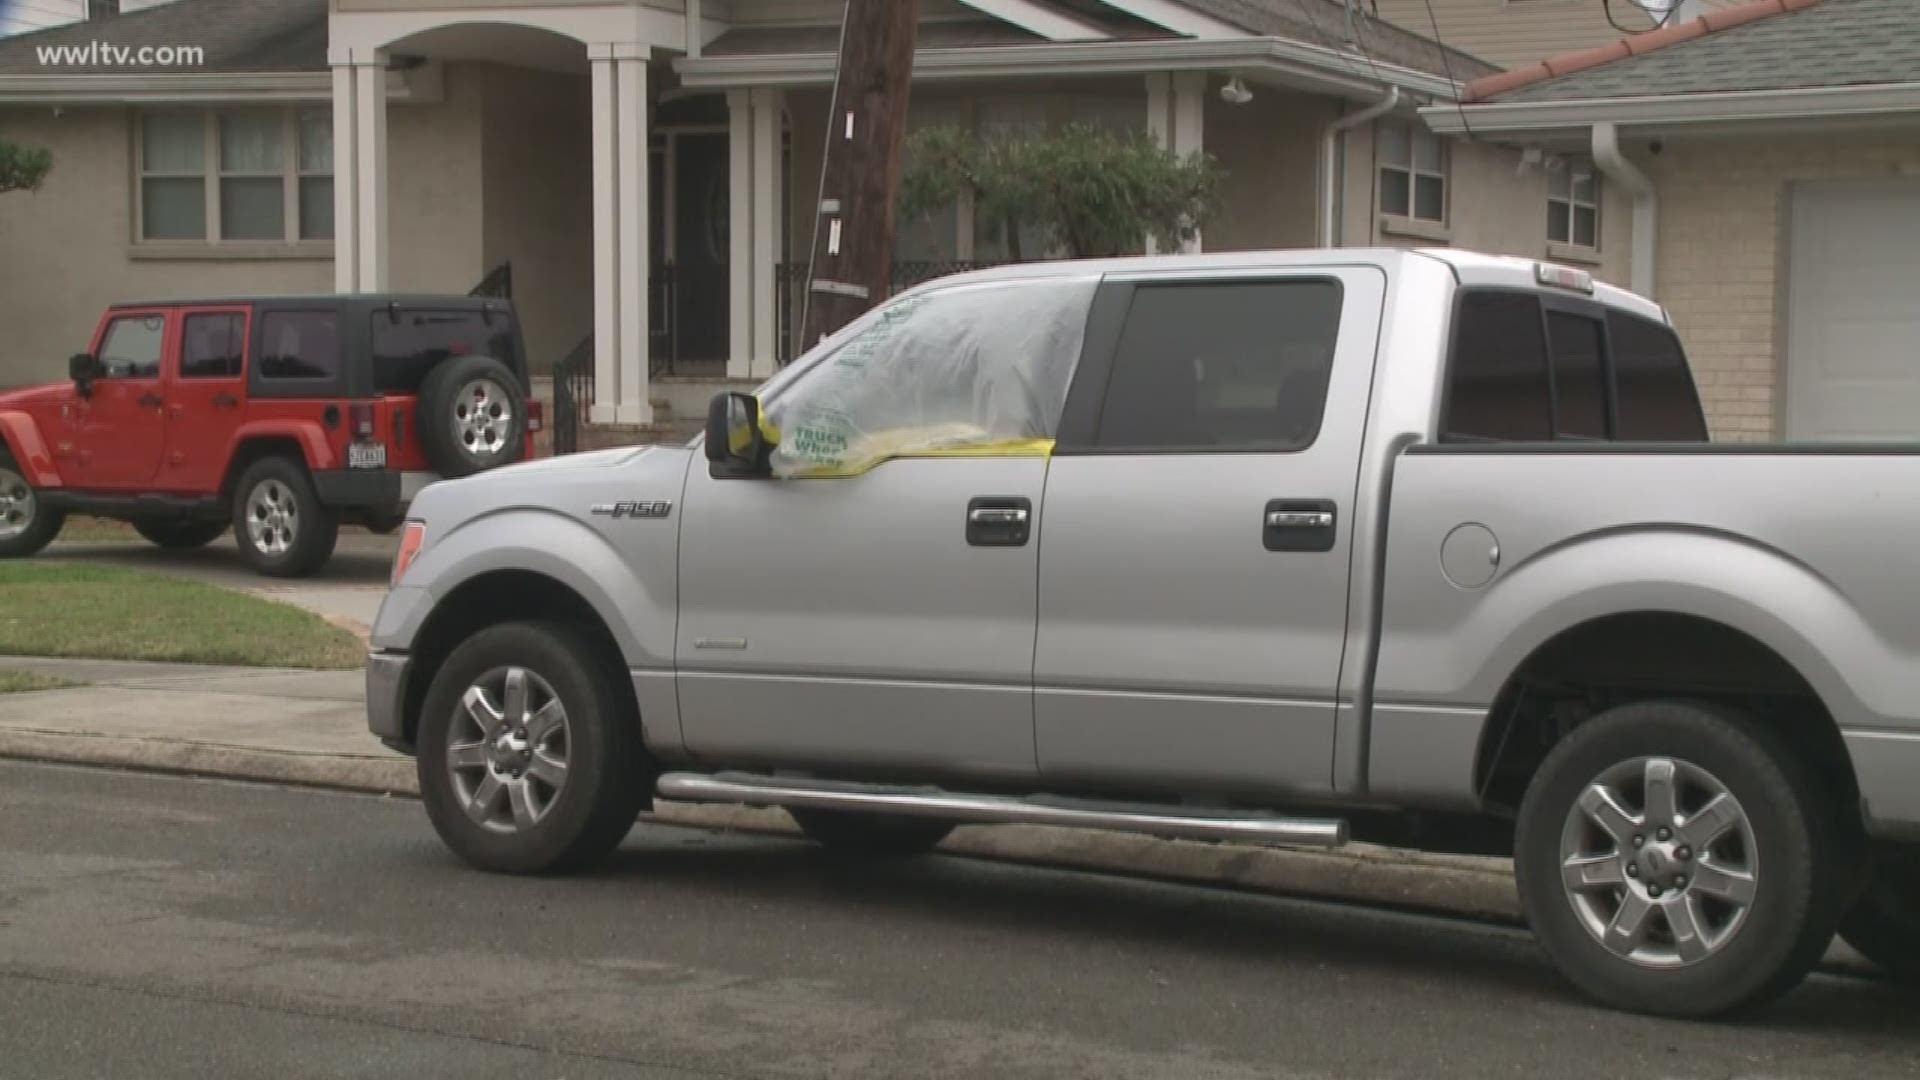 Over the weekend, NOPD worked a series of 27 car burglaries in their Third District.